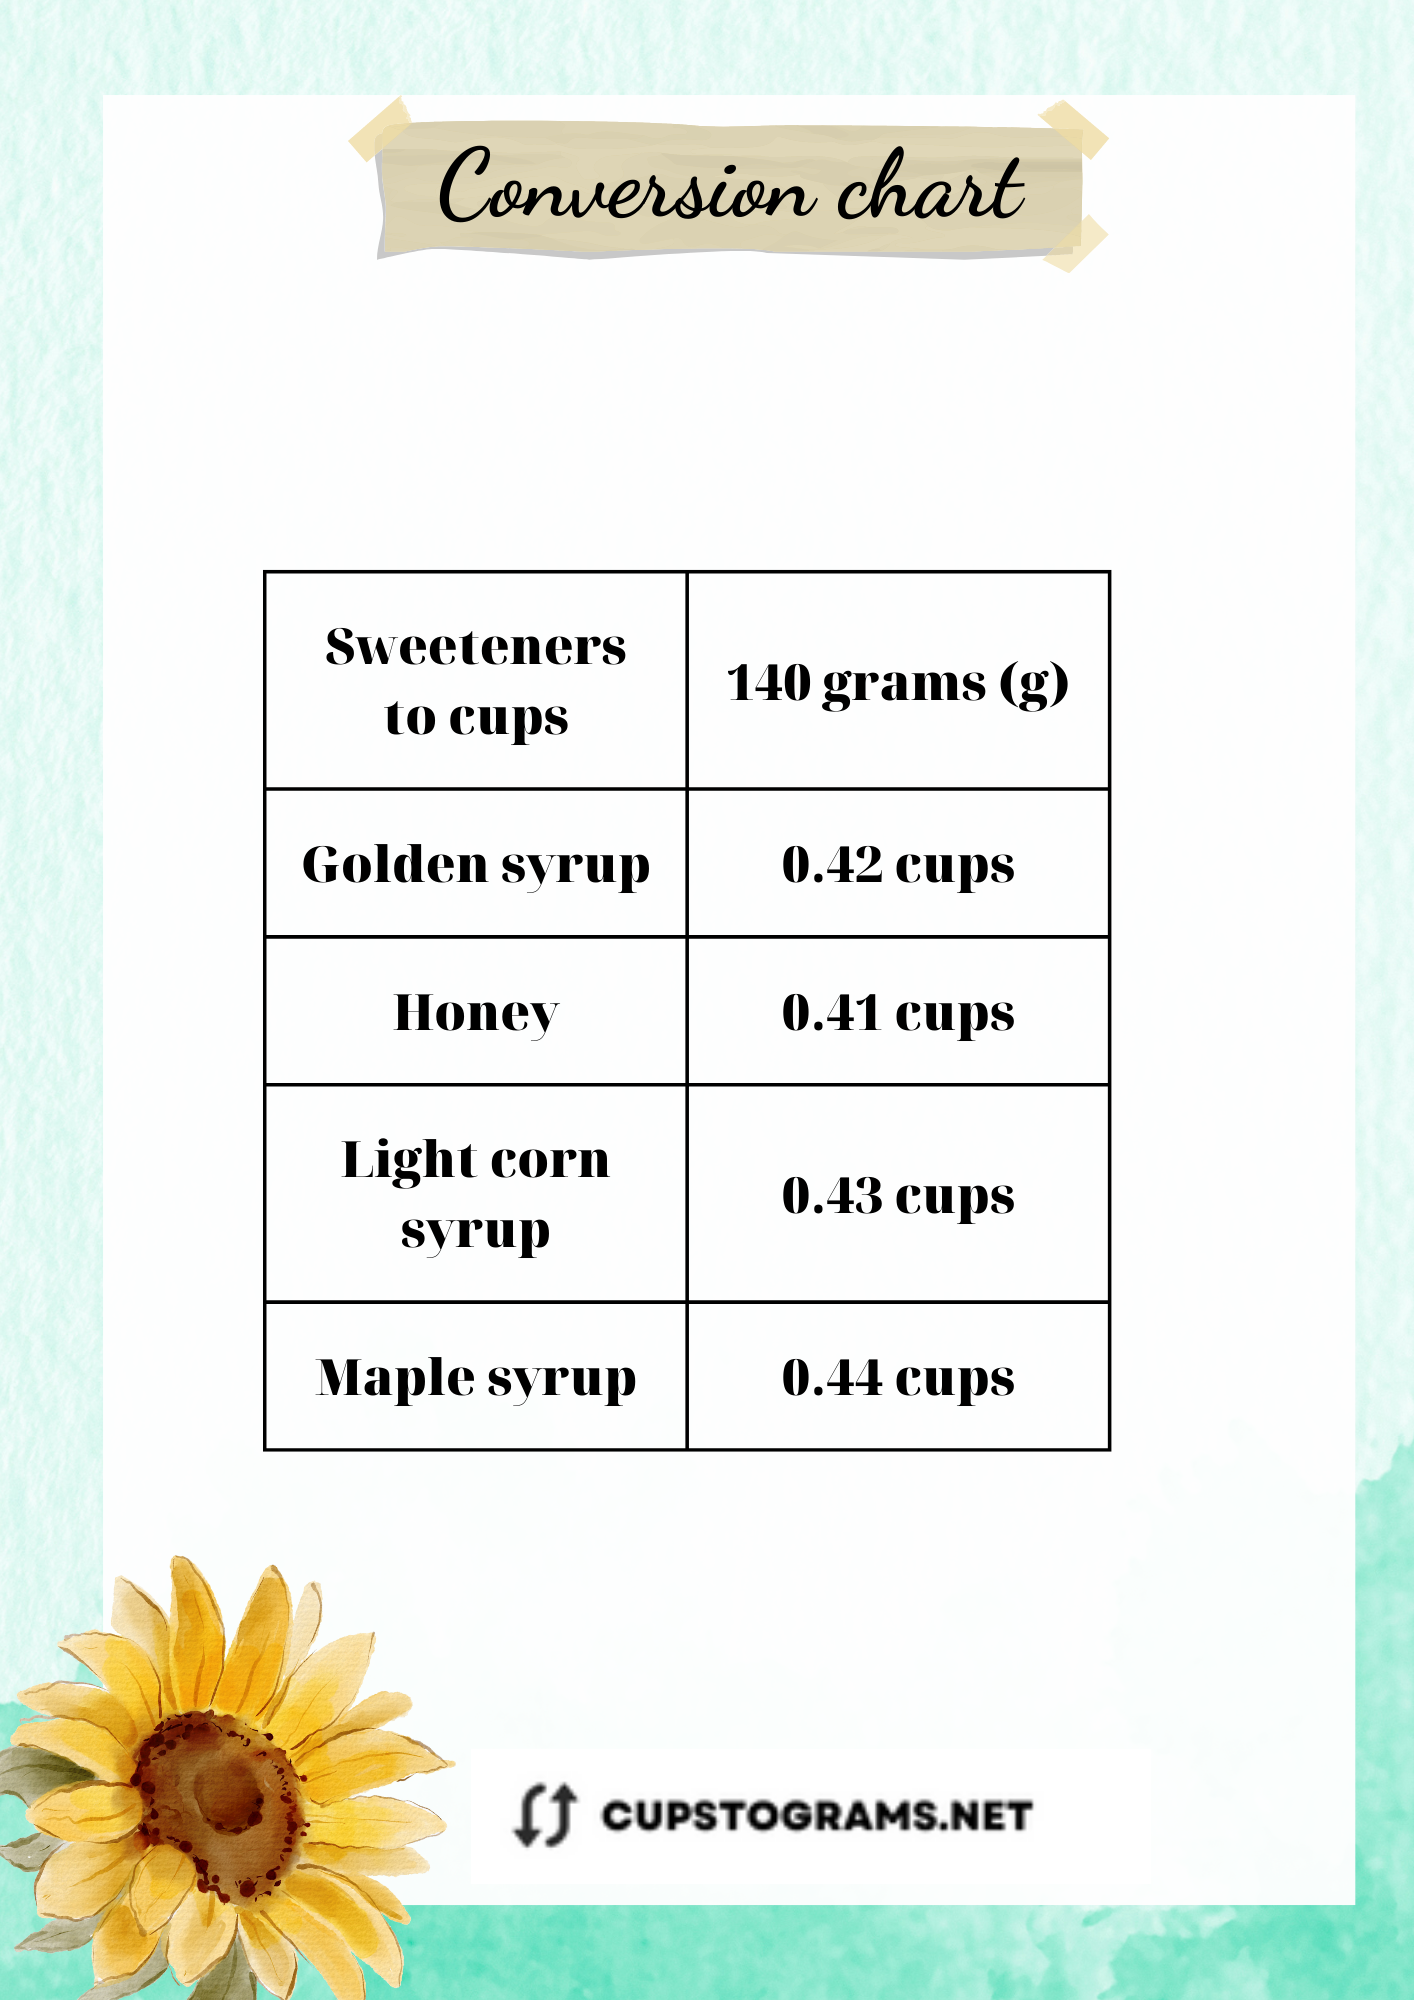 Conversion Chart: 140 Grams of Sweeteners to Cups